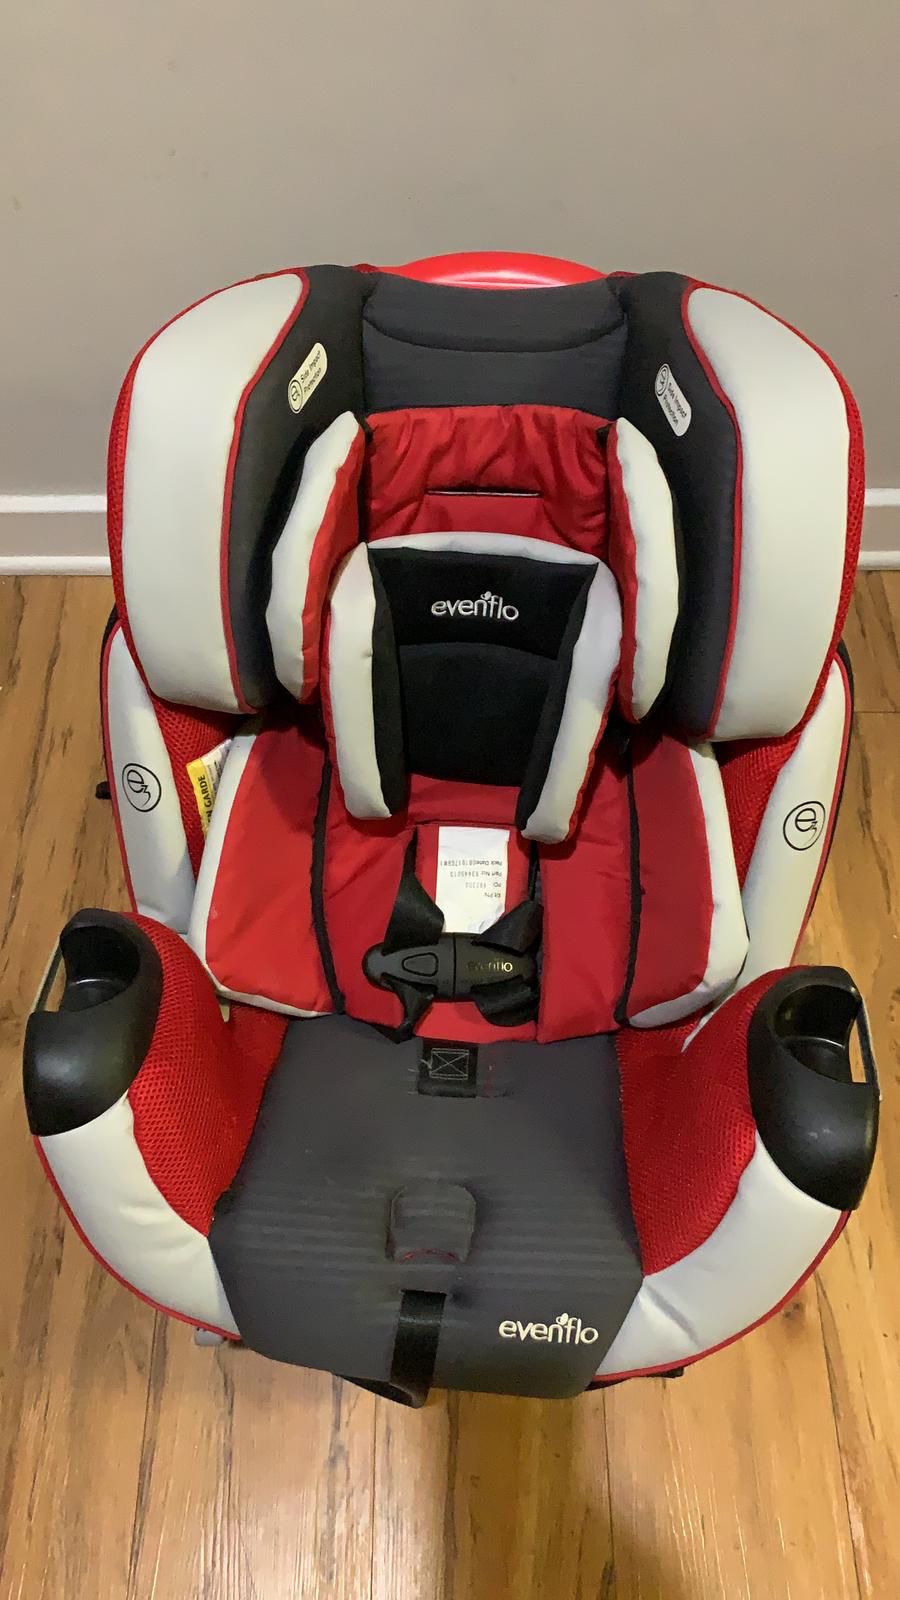 Evenflo convertible car seat for infant to toddler. Great condition, recently bought and gently used